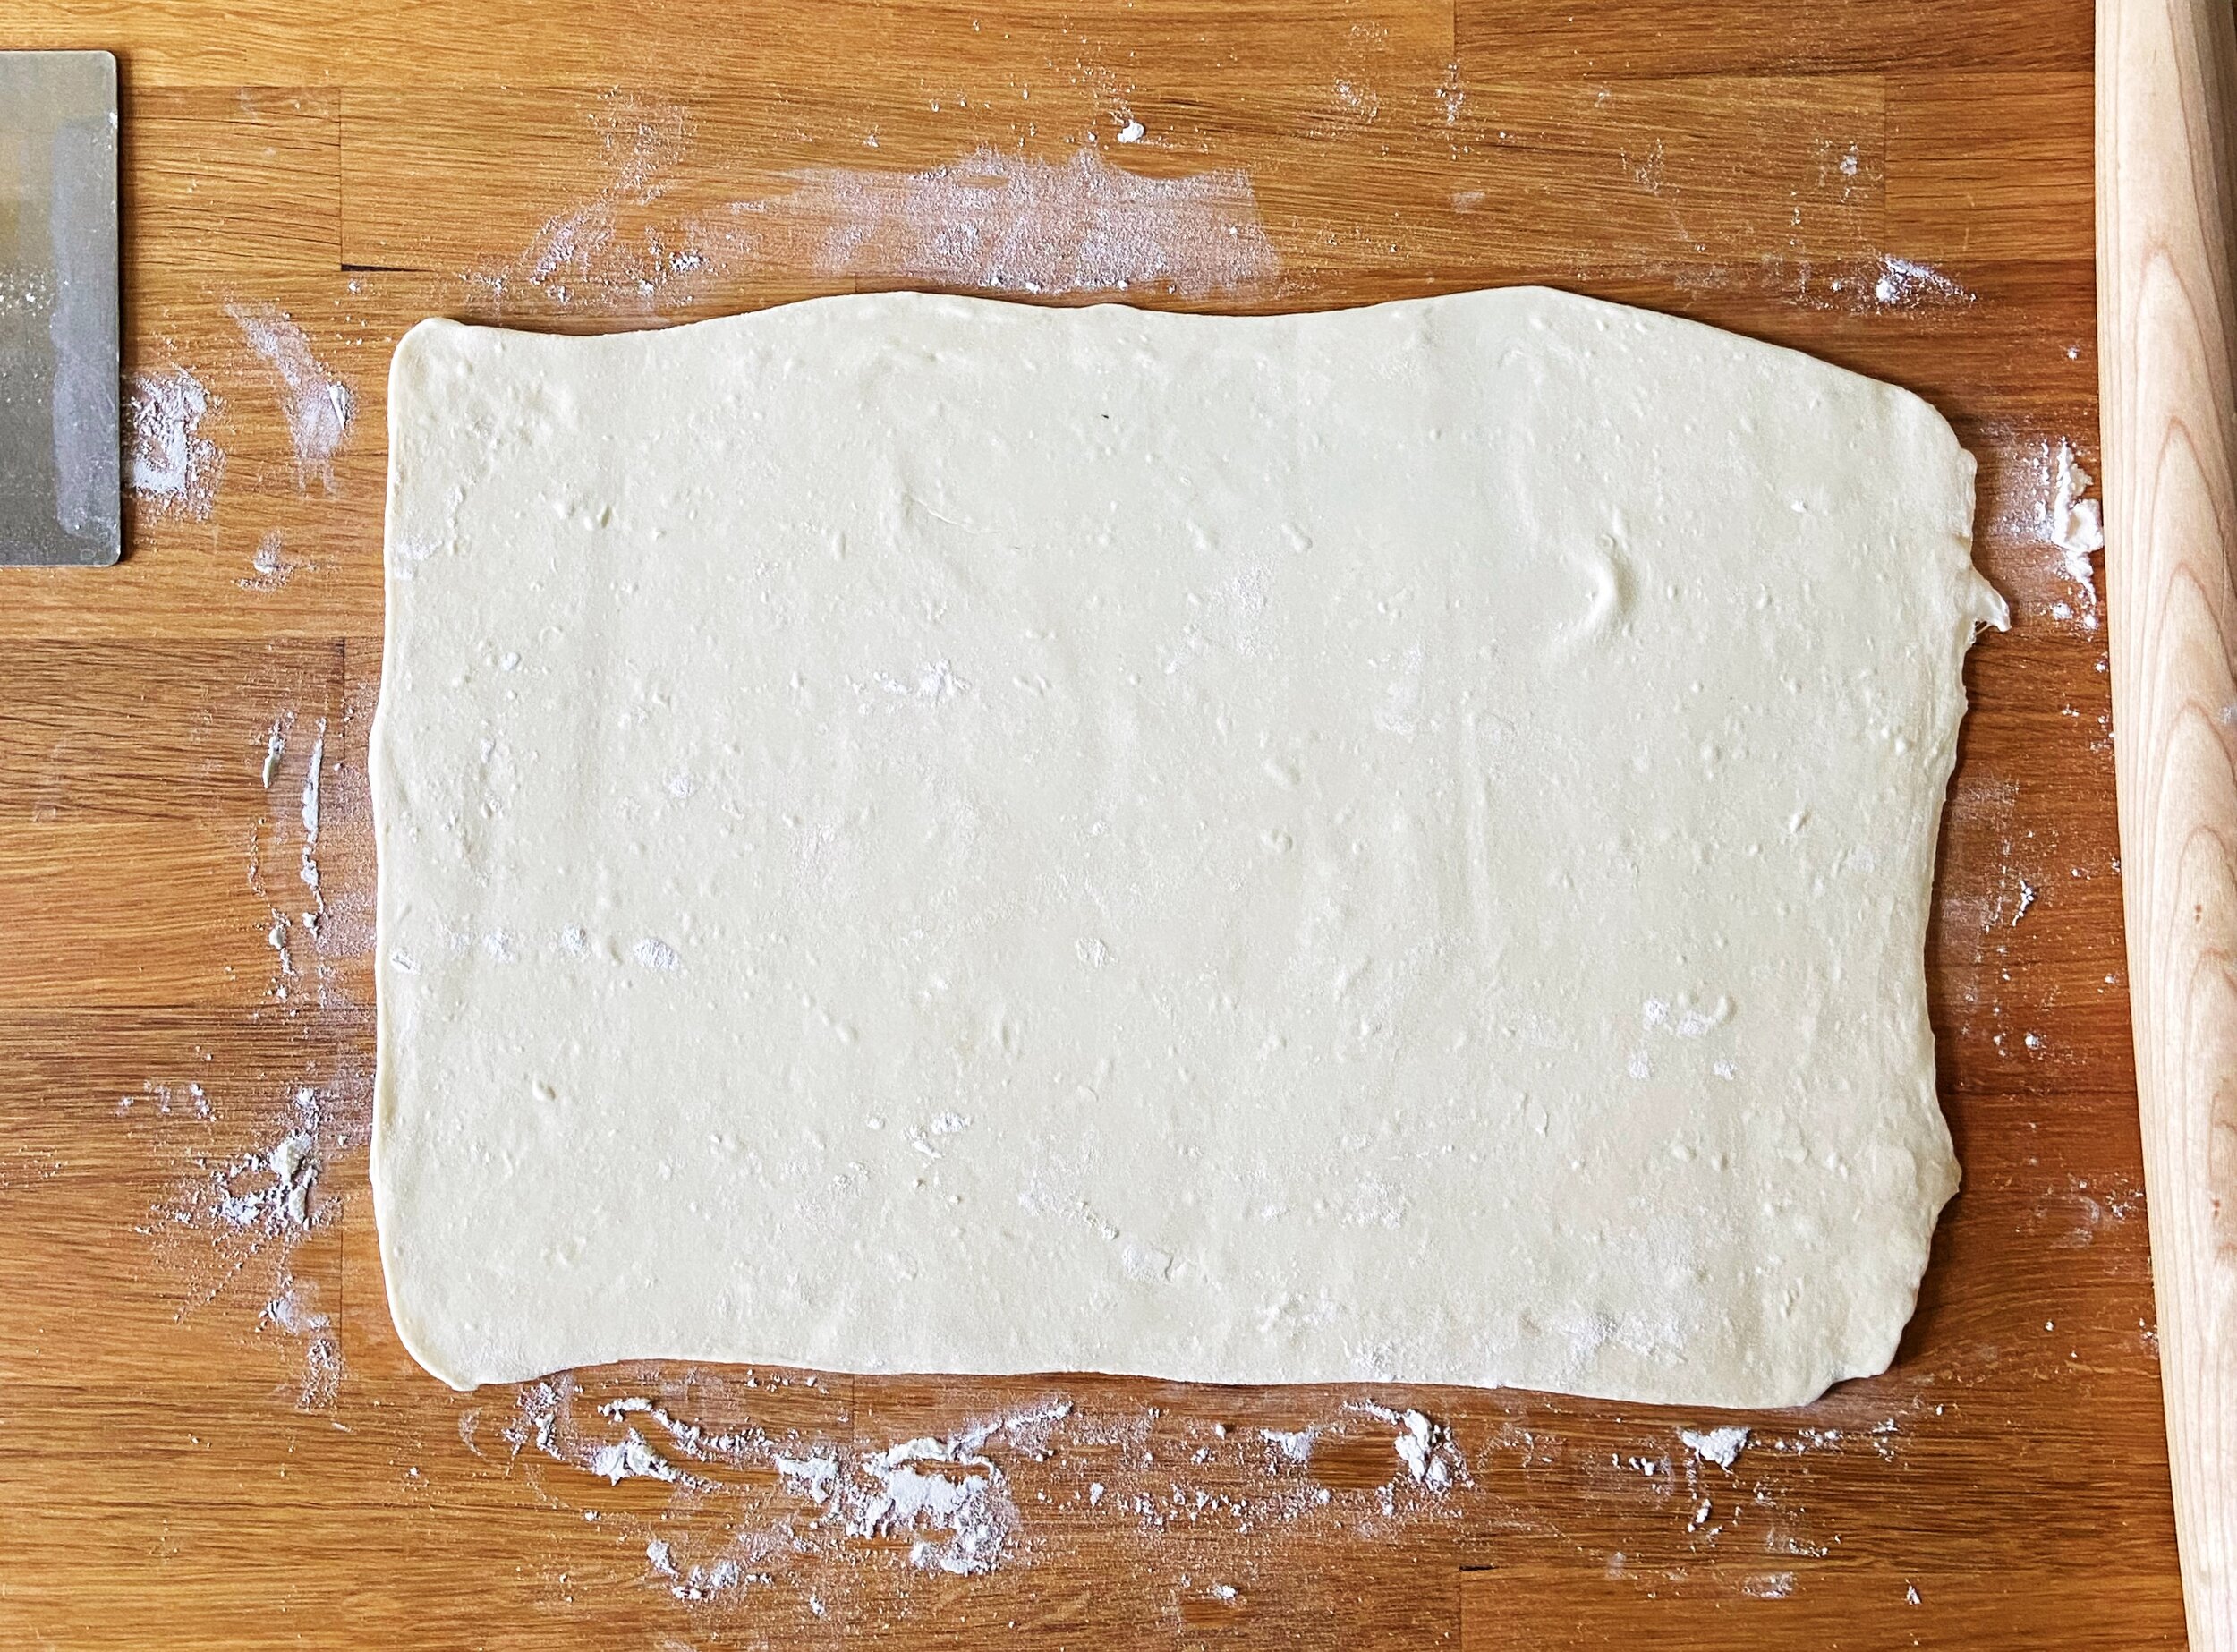 roll dough to 18x12" rectangle